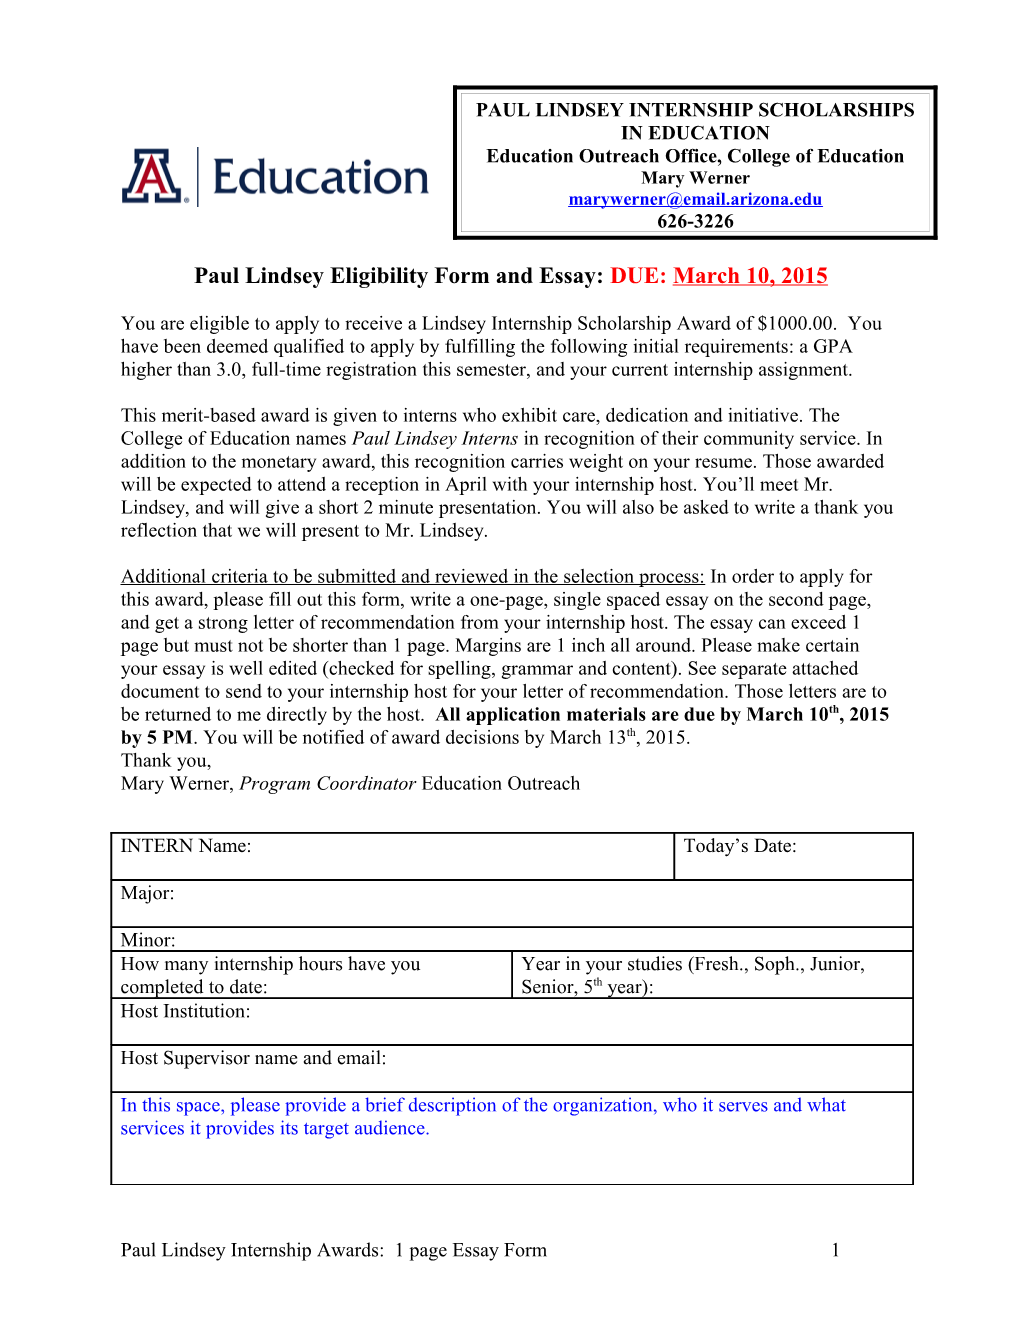 Paul Lindsey Eligibility Form and Essay: DUE: March 10, 2015